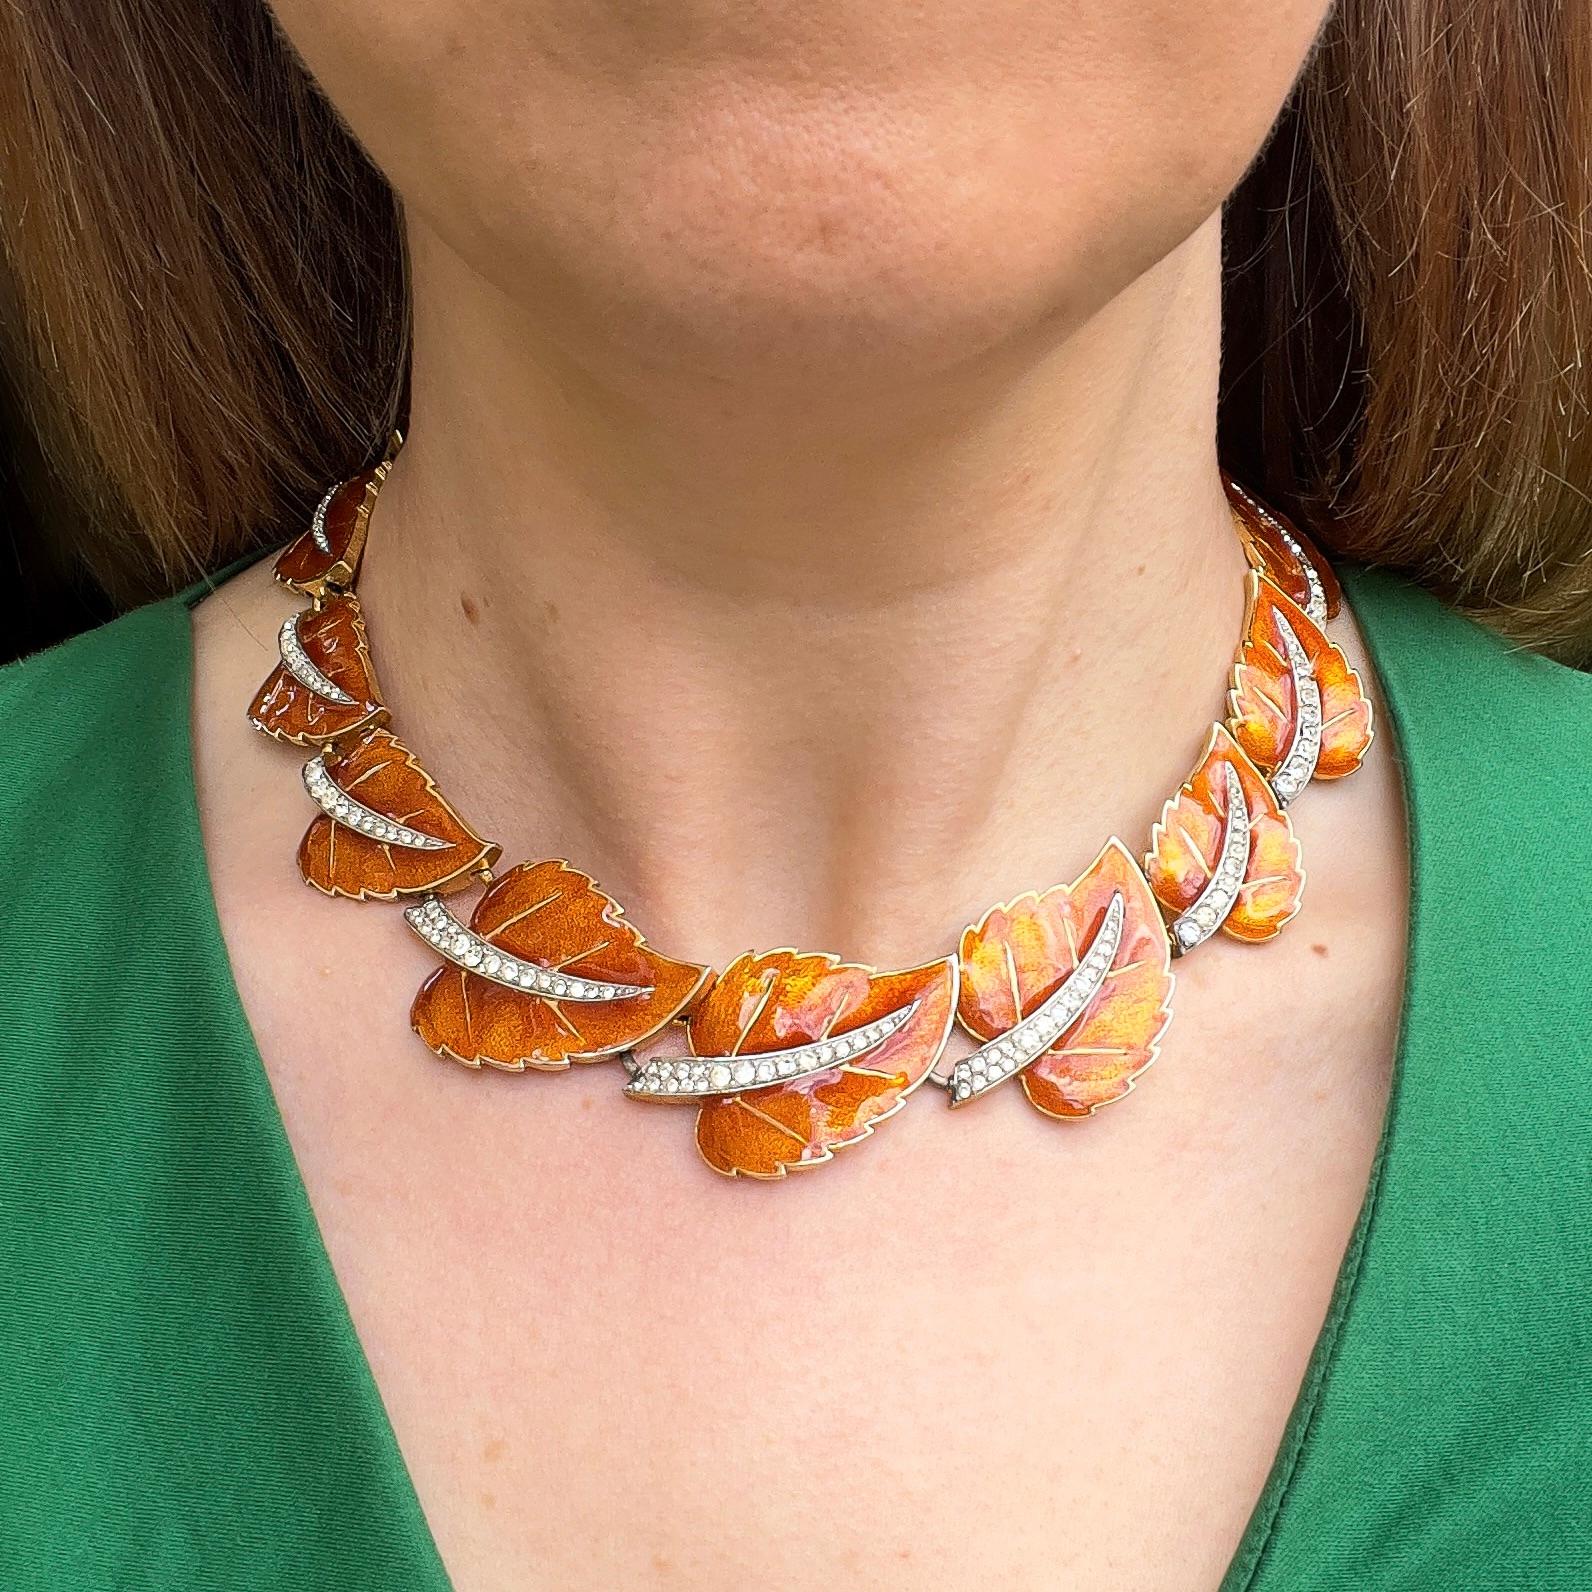 This beautiful necklace exemplifies the fine craftsmanship and intricate designs of Joseph Mazer.

Condition Report:
Excellent

The Details...
This gold plated necklace features a series of leaves graduating in size and linked together. The leaves